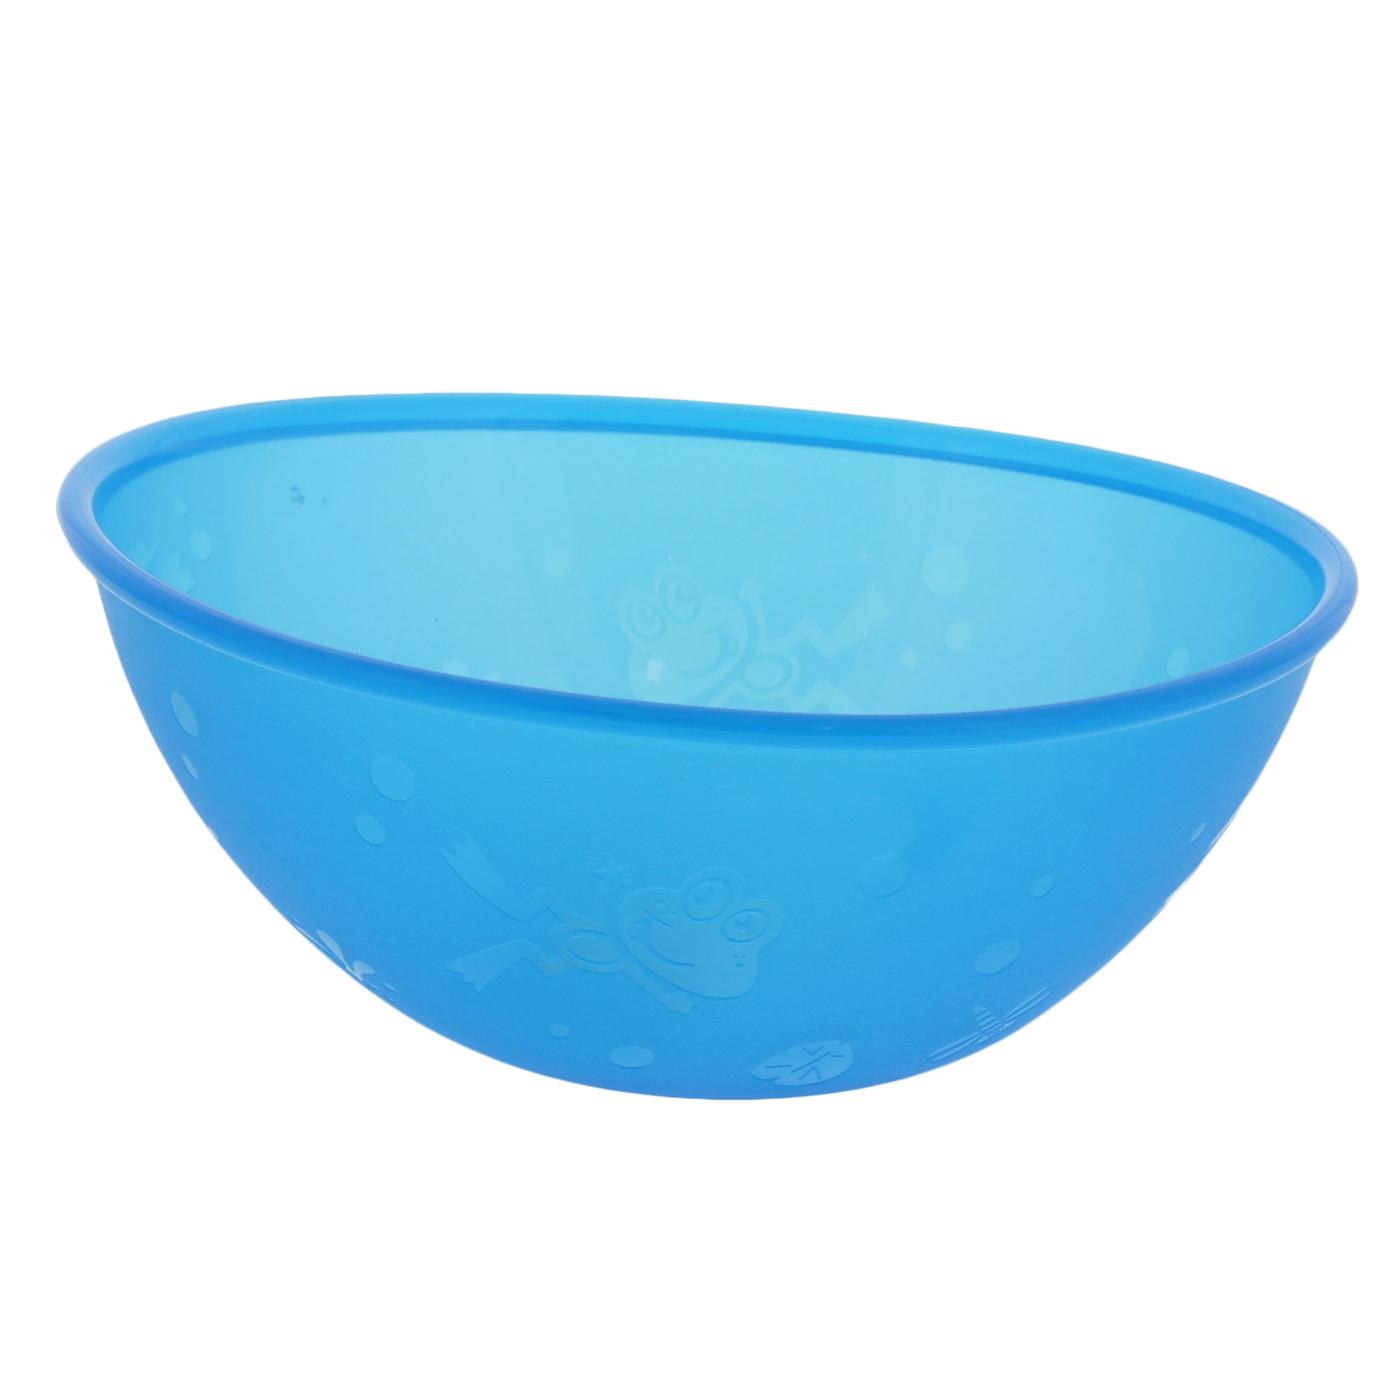 Nuby Embossed Value Feeding Bowl, Assorted Colors; image 1 of 6